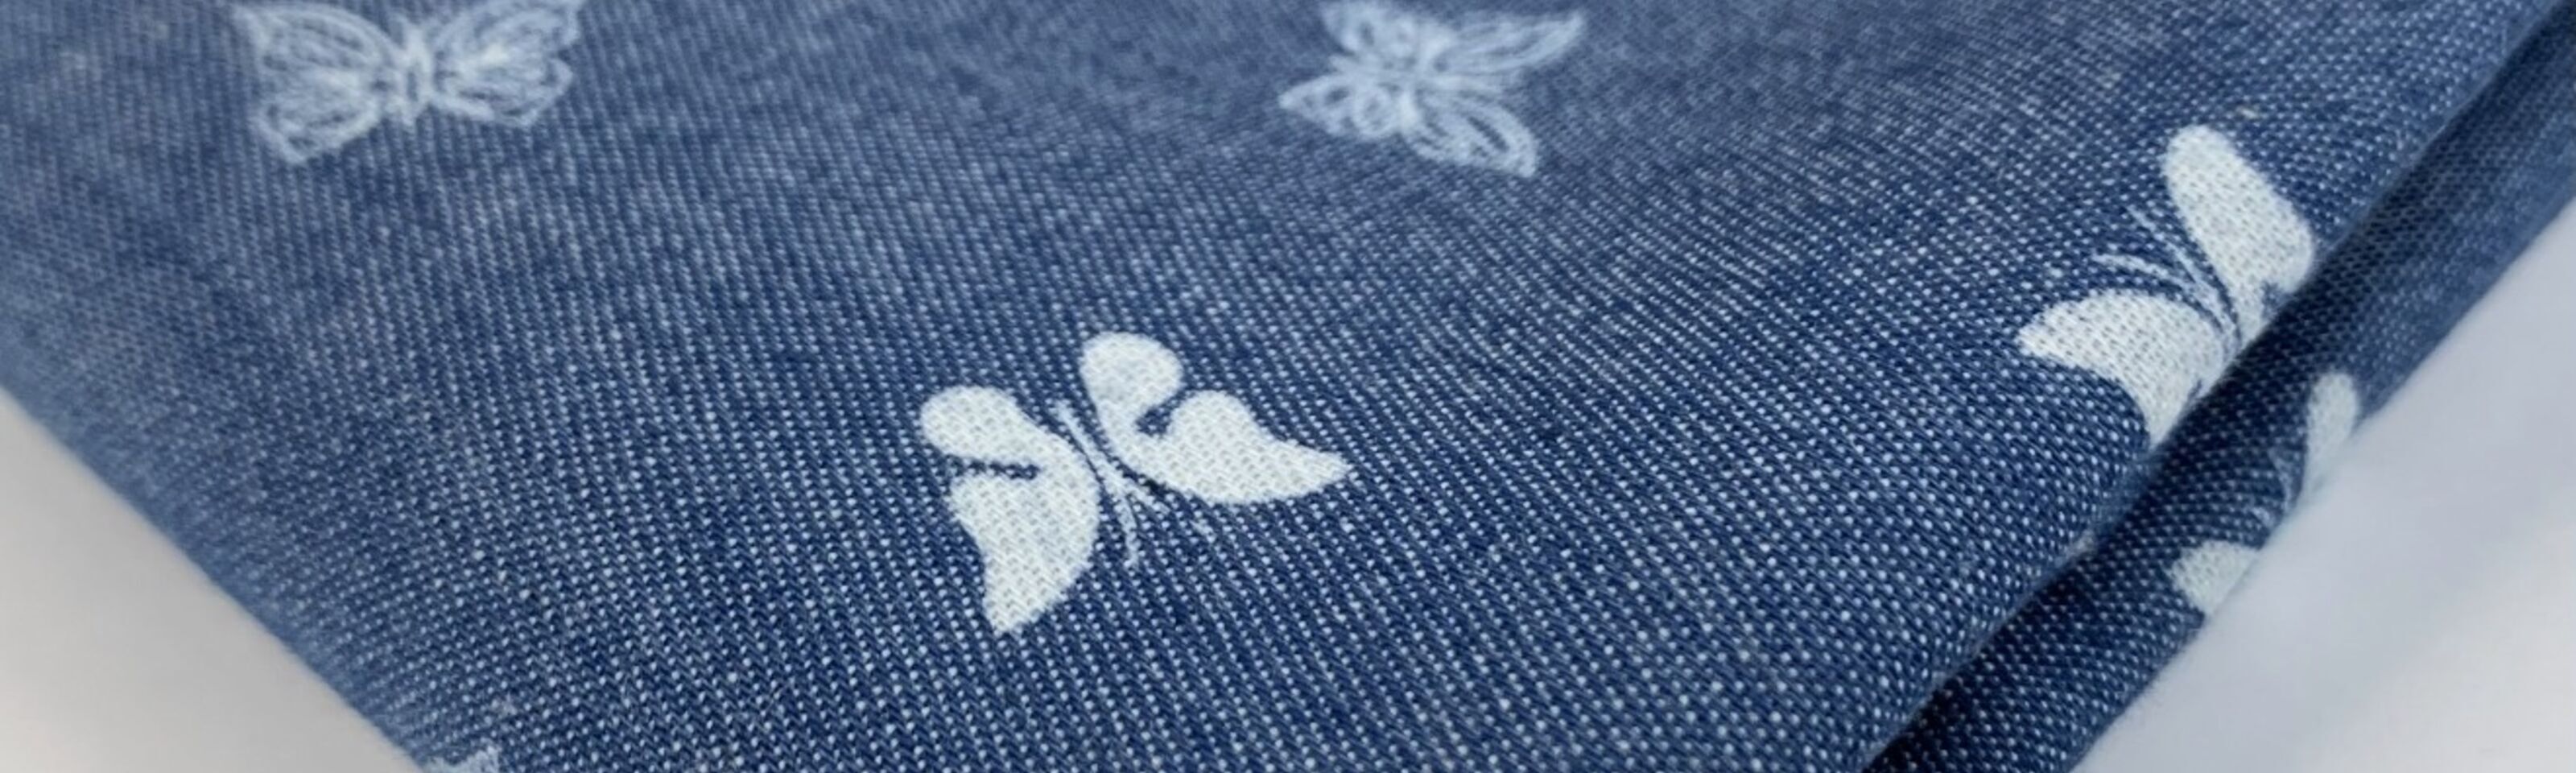 Heavenly - White Butterfly - Cotton Denim Chambray Butterflies Printed Shirting Fabric - Fold Fabric Photo